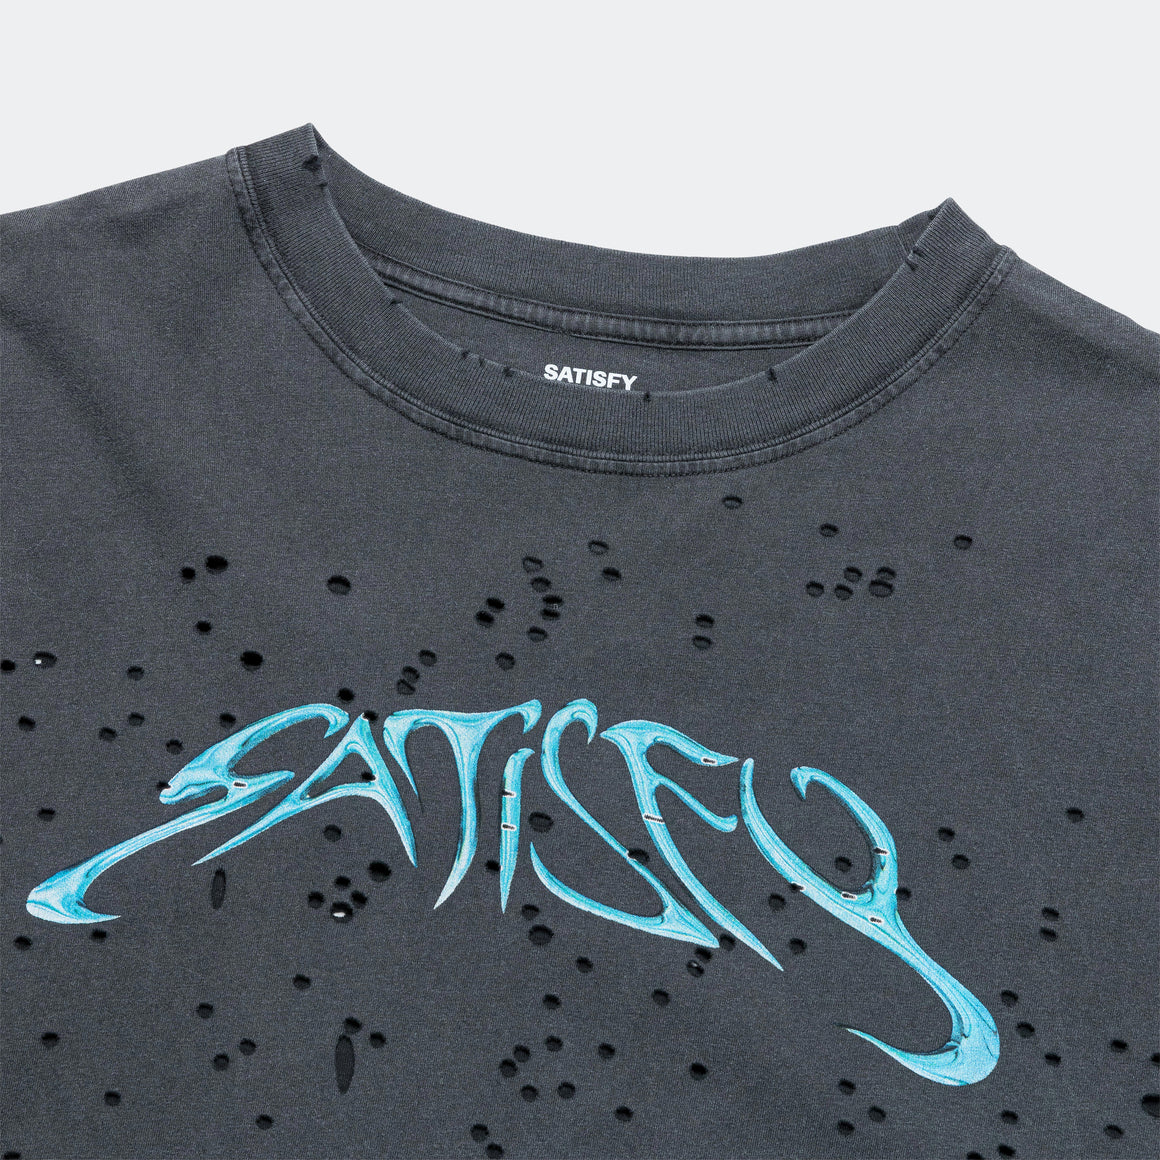 Satisfy - Moth-Tech™ T-Shirt - Aged Black - Up There Athletics